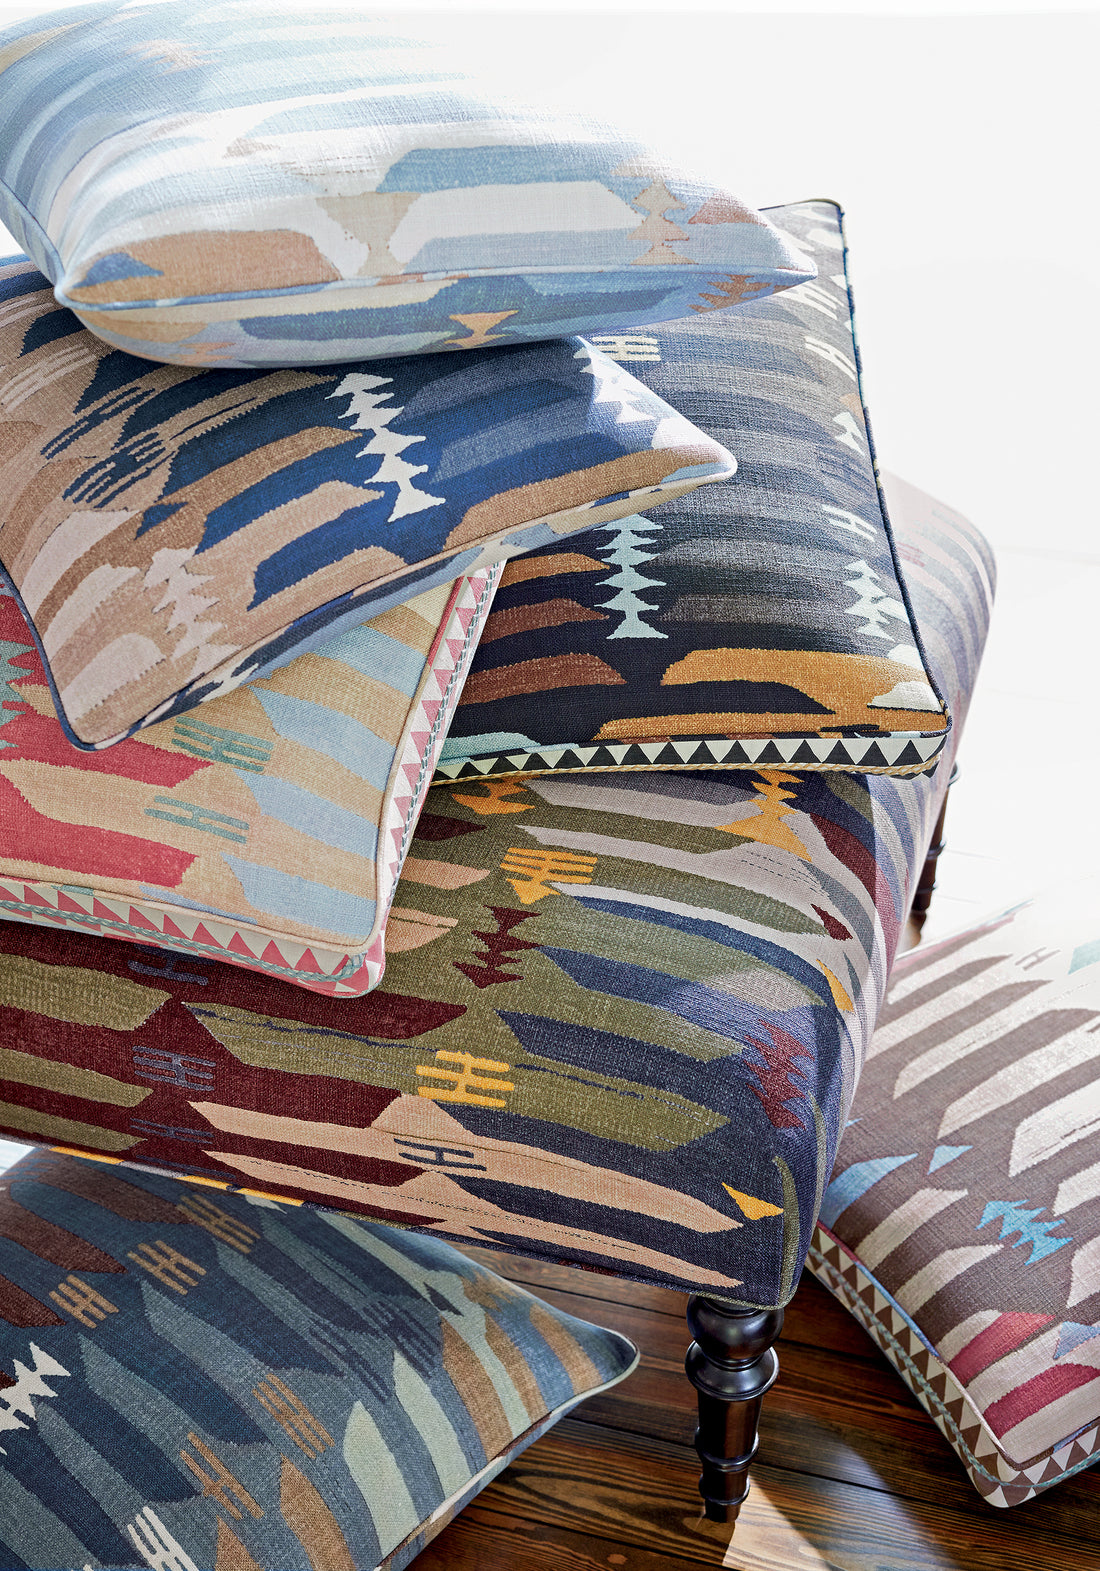 Baxter Ottoman and collection of Rio Grande printed fabric pillows featuring navy and brown color fabric - pattern number F913210 - by Thibaut in the Mesa collection